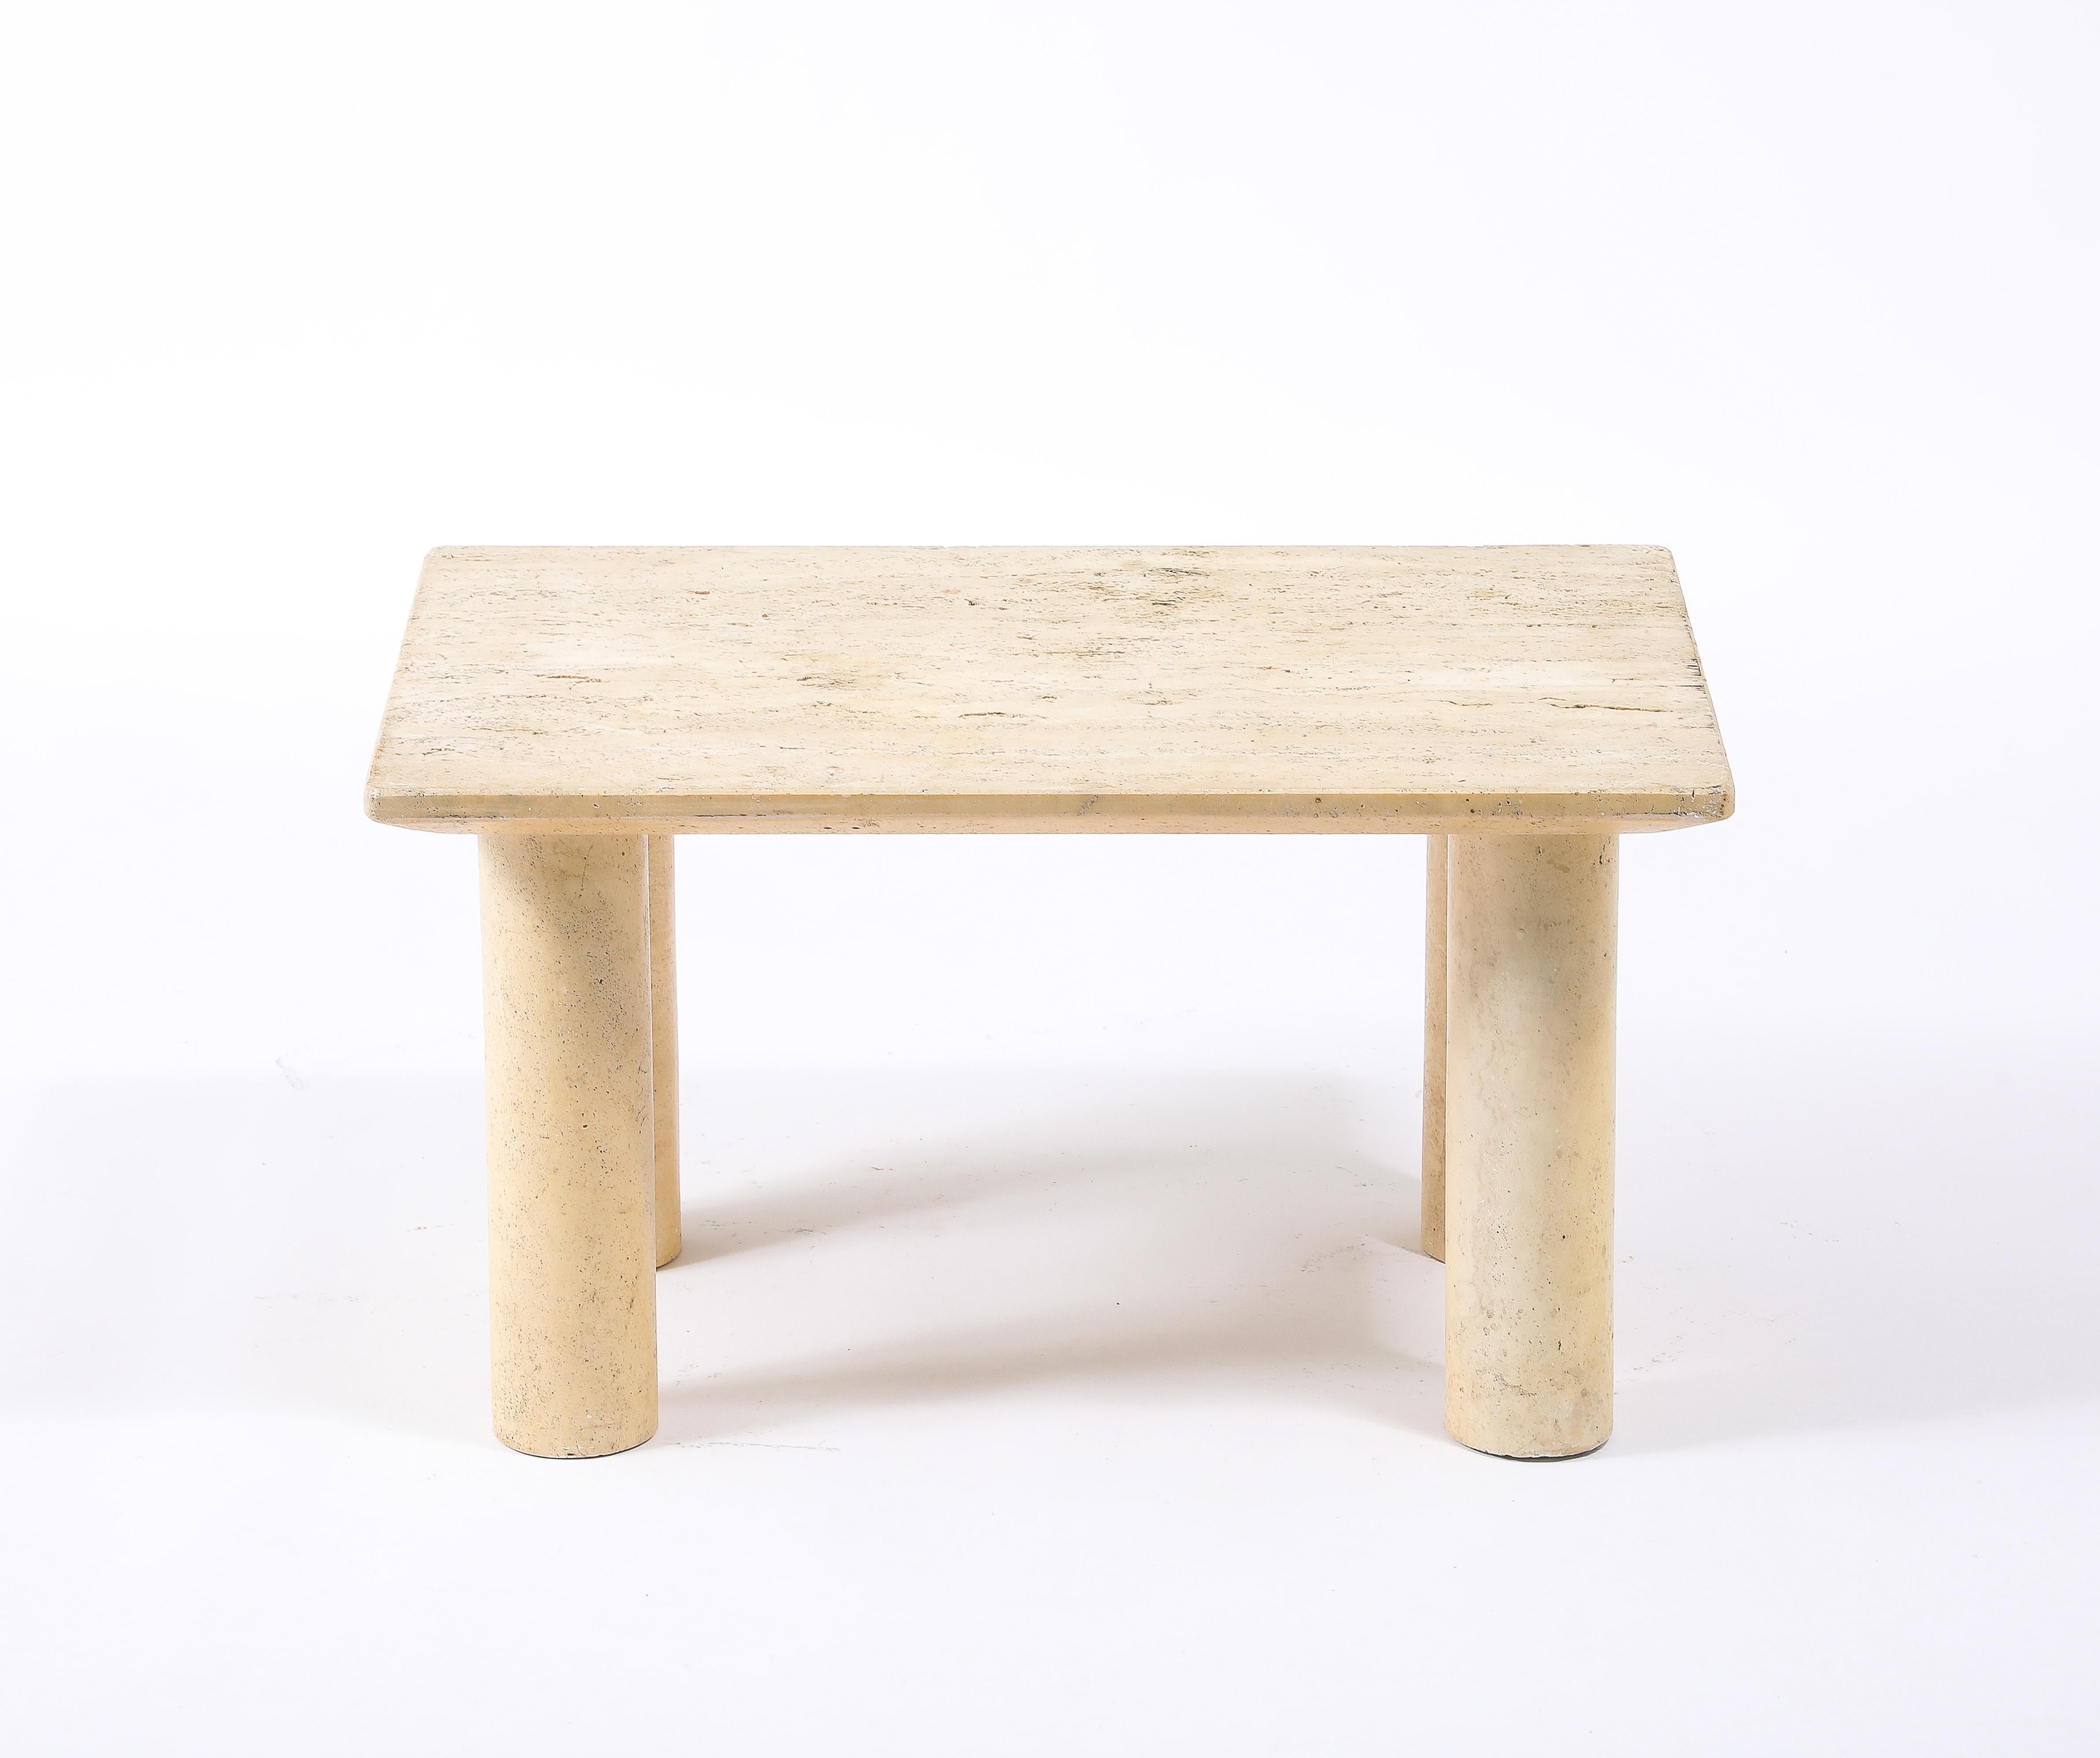 Solid Travertine table, a rectangular top with a chamfered lower edge supported by large round travertine legs.
